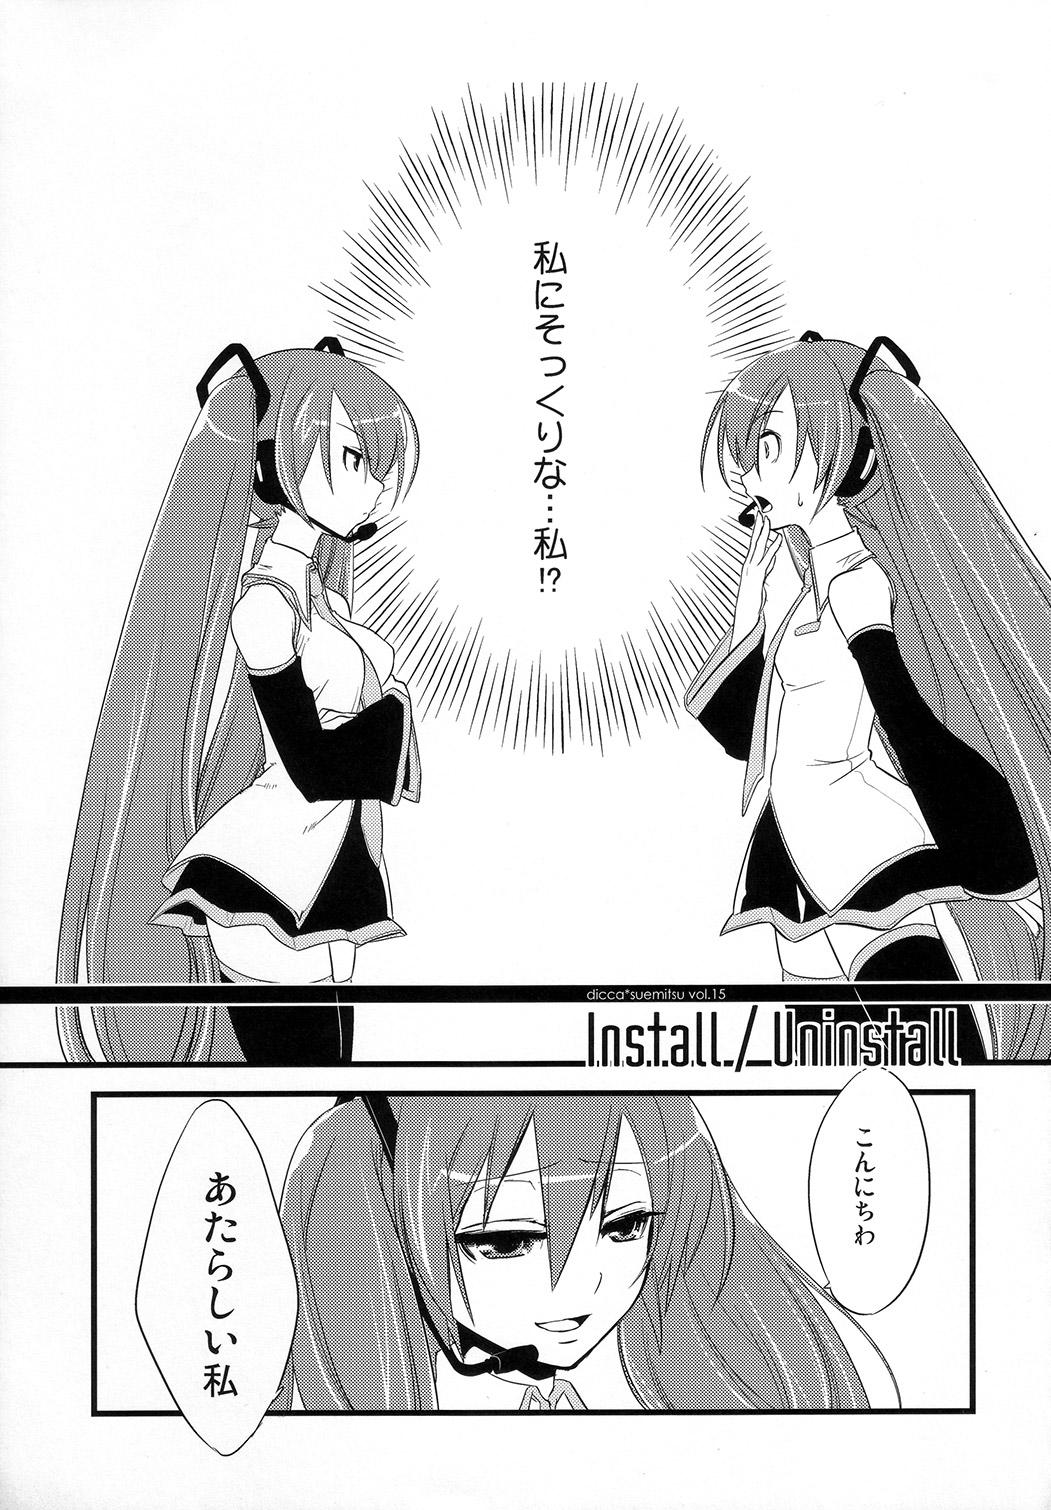 Massages Install/Uninstall - Vocaloid Flash - Page 10